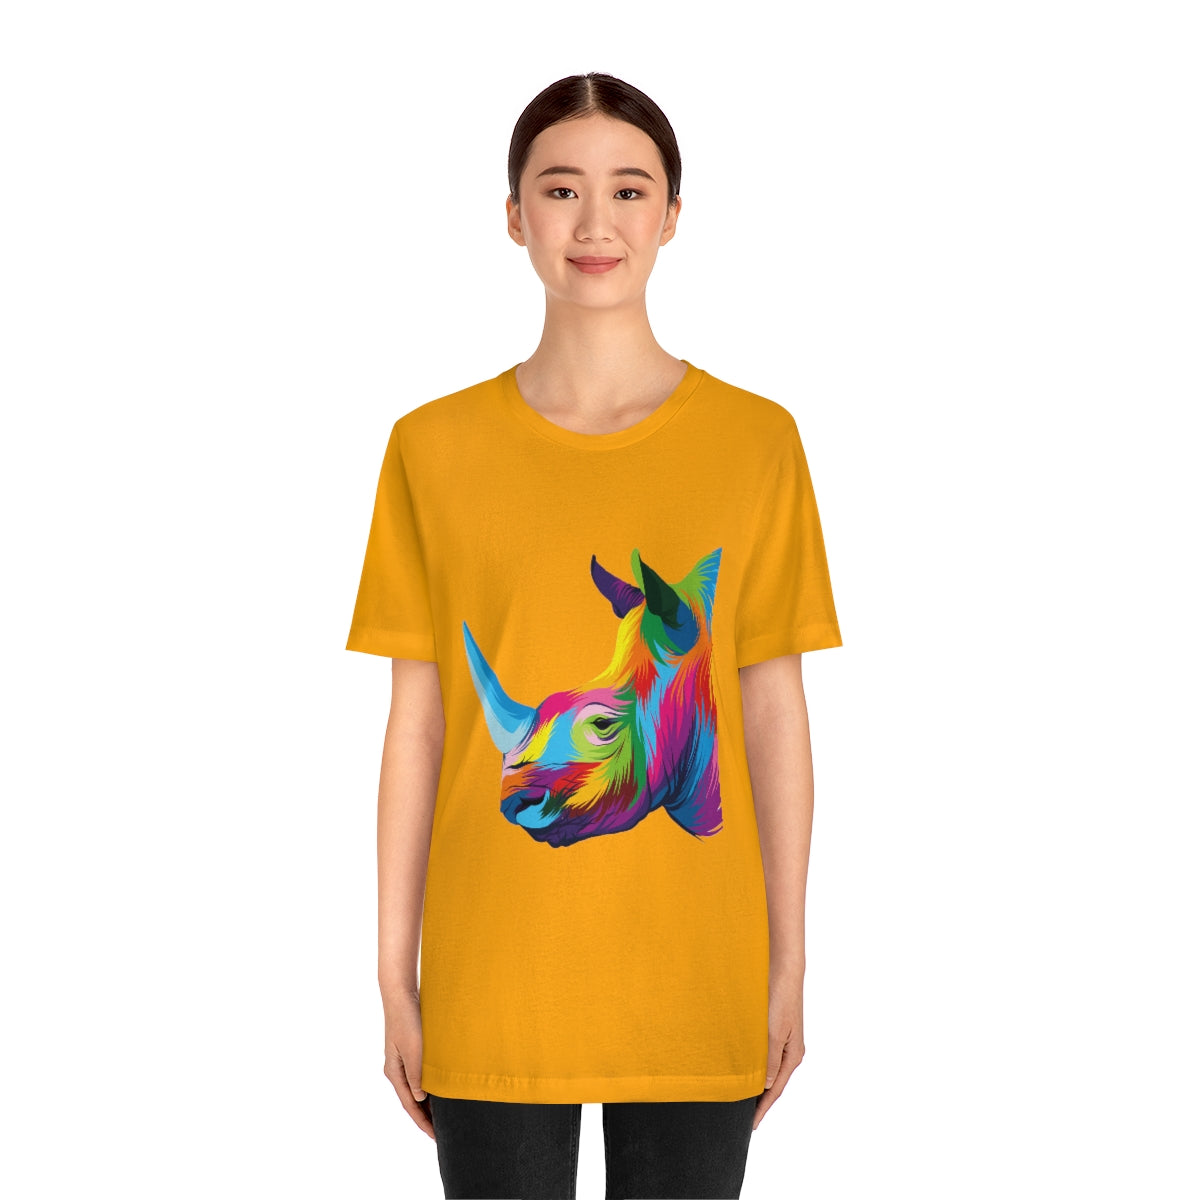 Unisex Jersey Short Sleeve Tee "Abstract colorful Rhino"